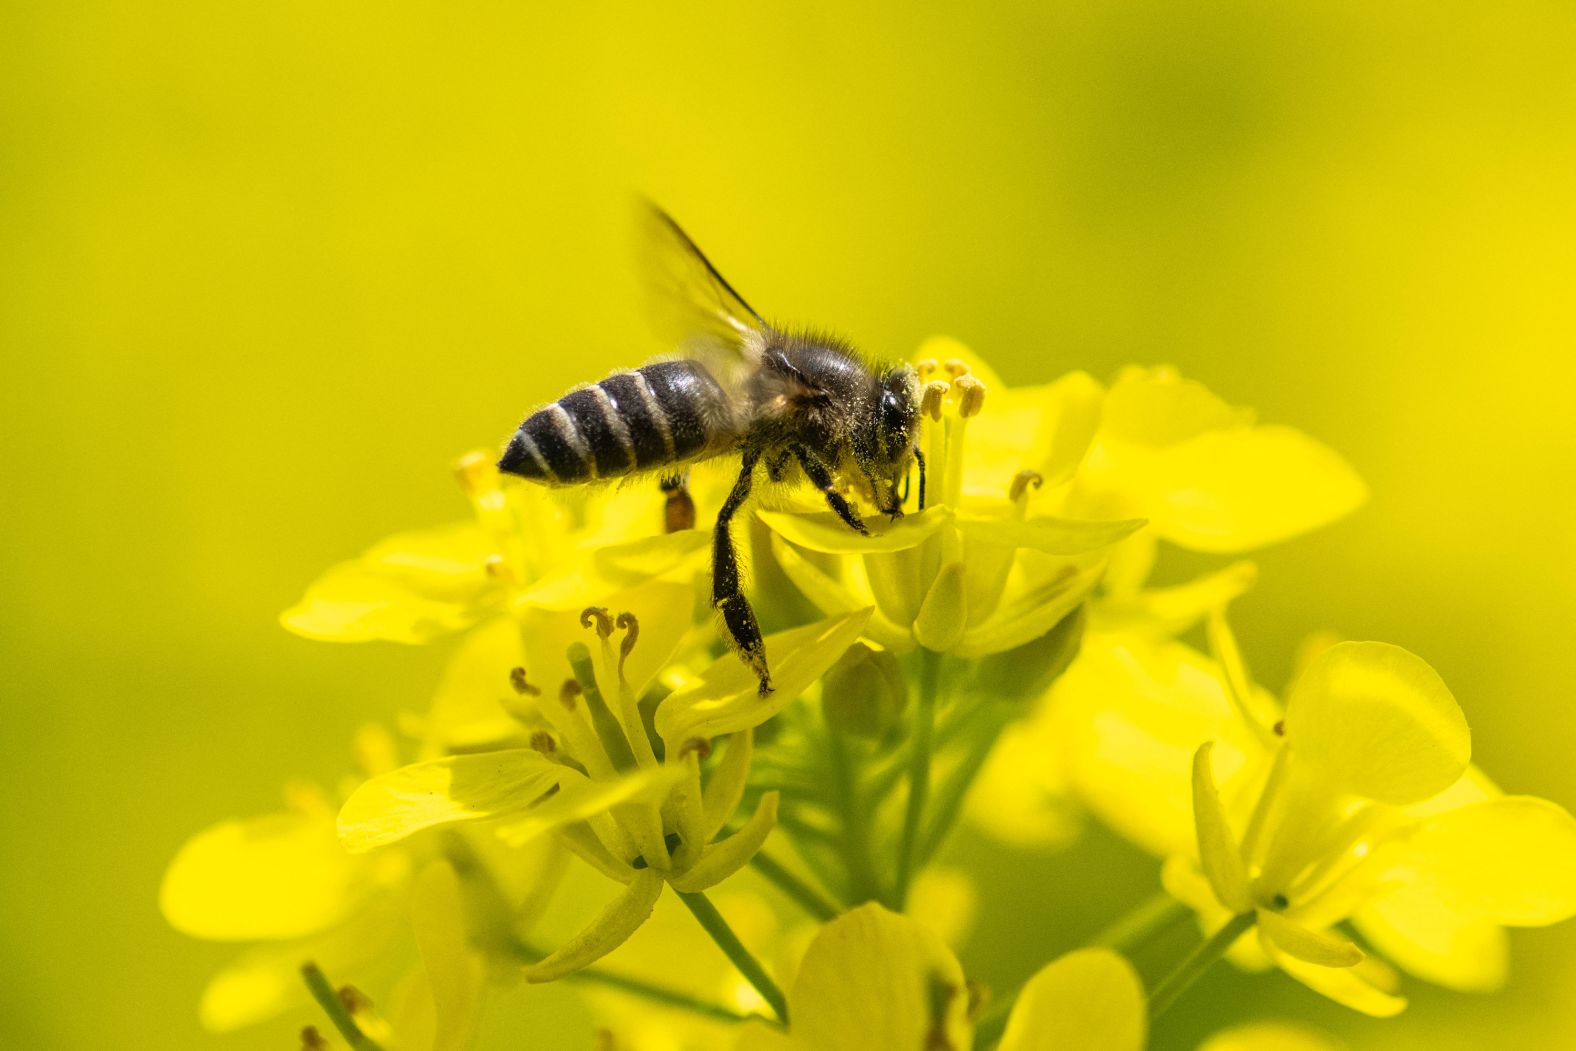 A bee feeds on nectar from a rapeseed flower in Hitachinaka, Japan, on Tuesday, April 2.